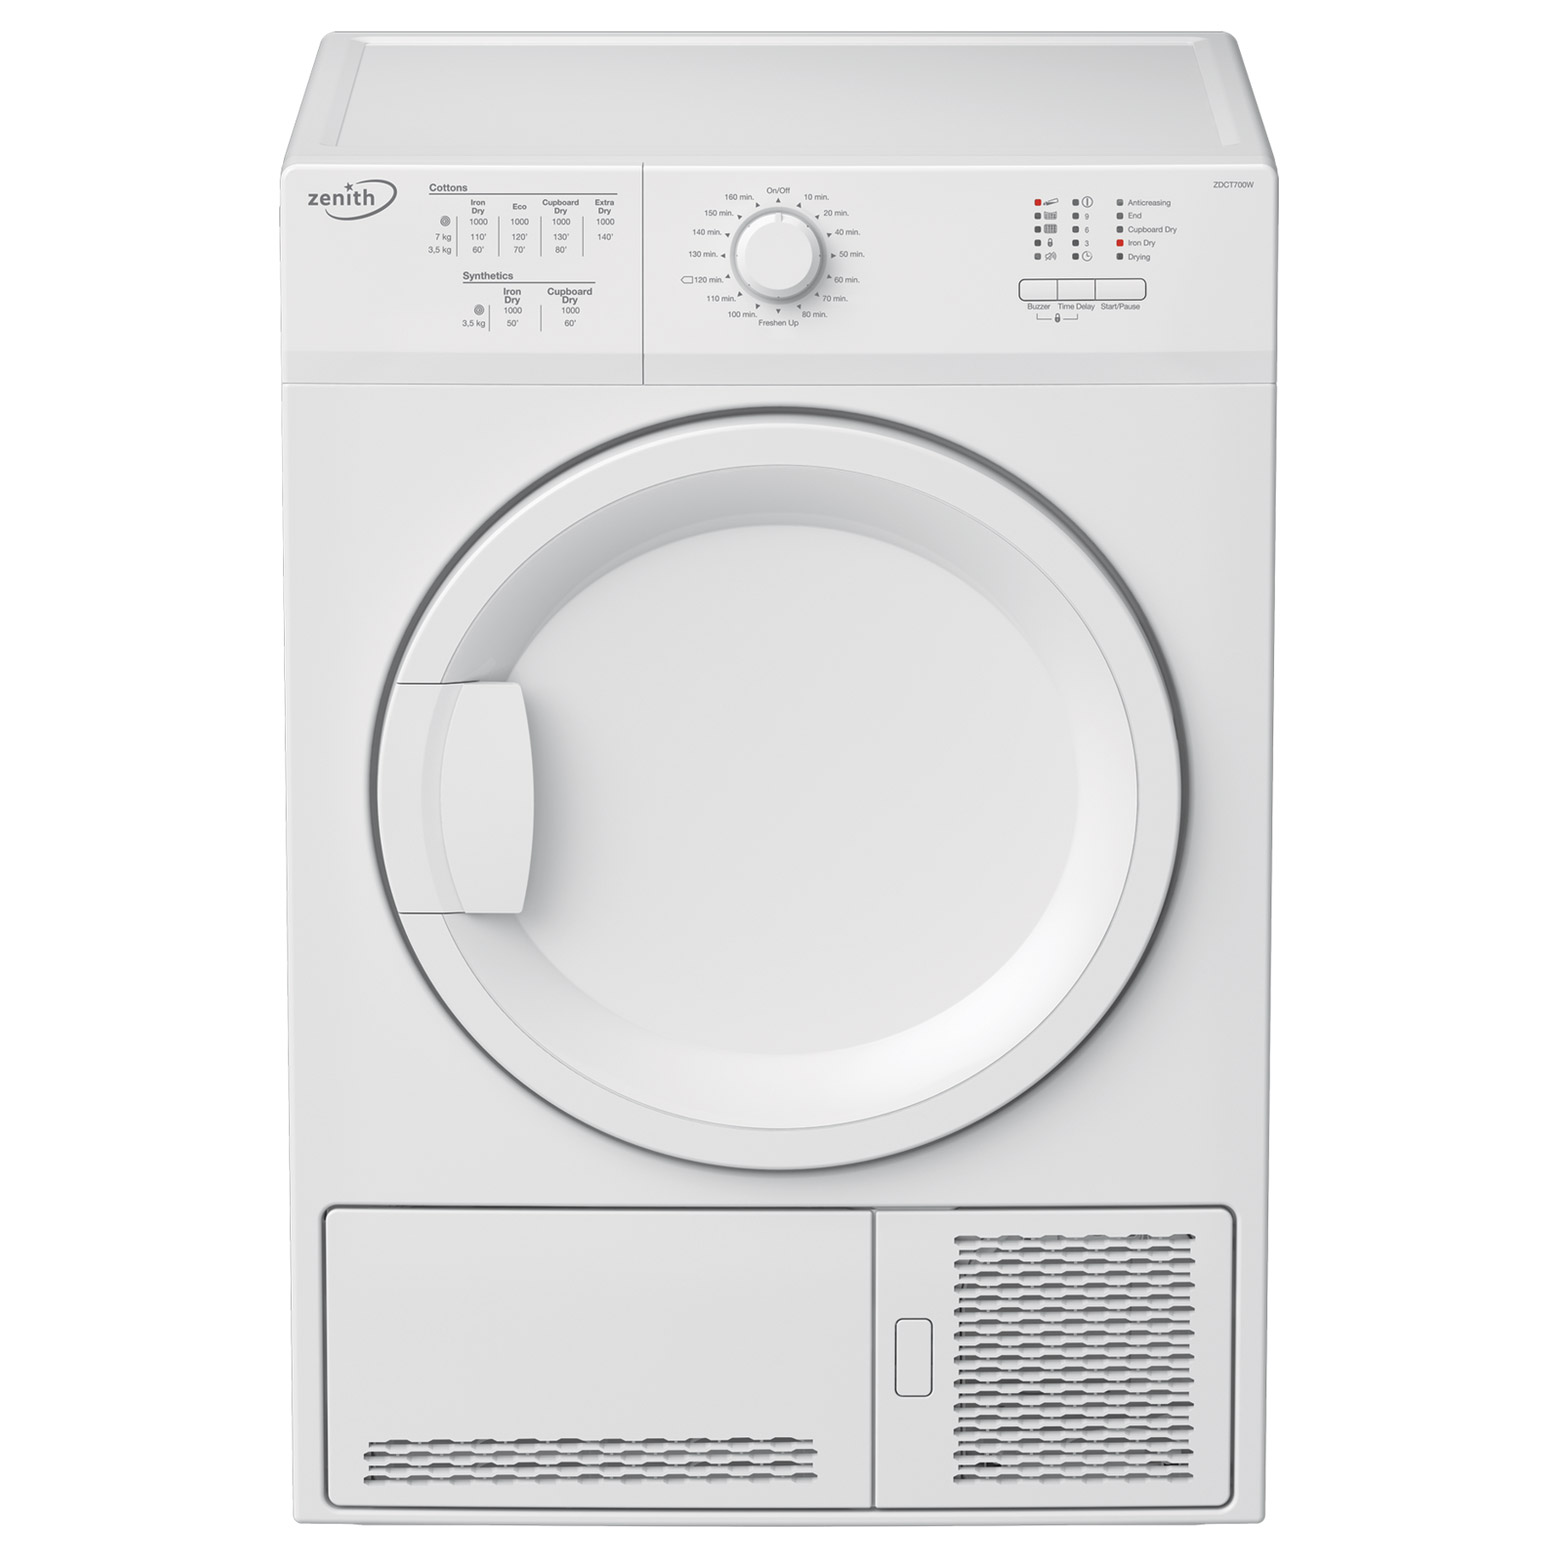 Image of Zenith ZDCT700W 7Kg Condensor Dryer White B Rated Reverse Delay Start